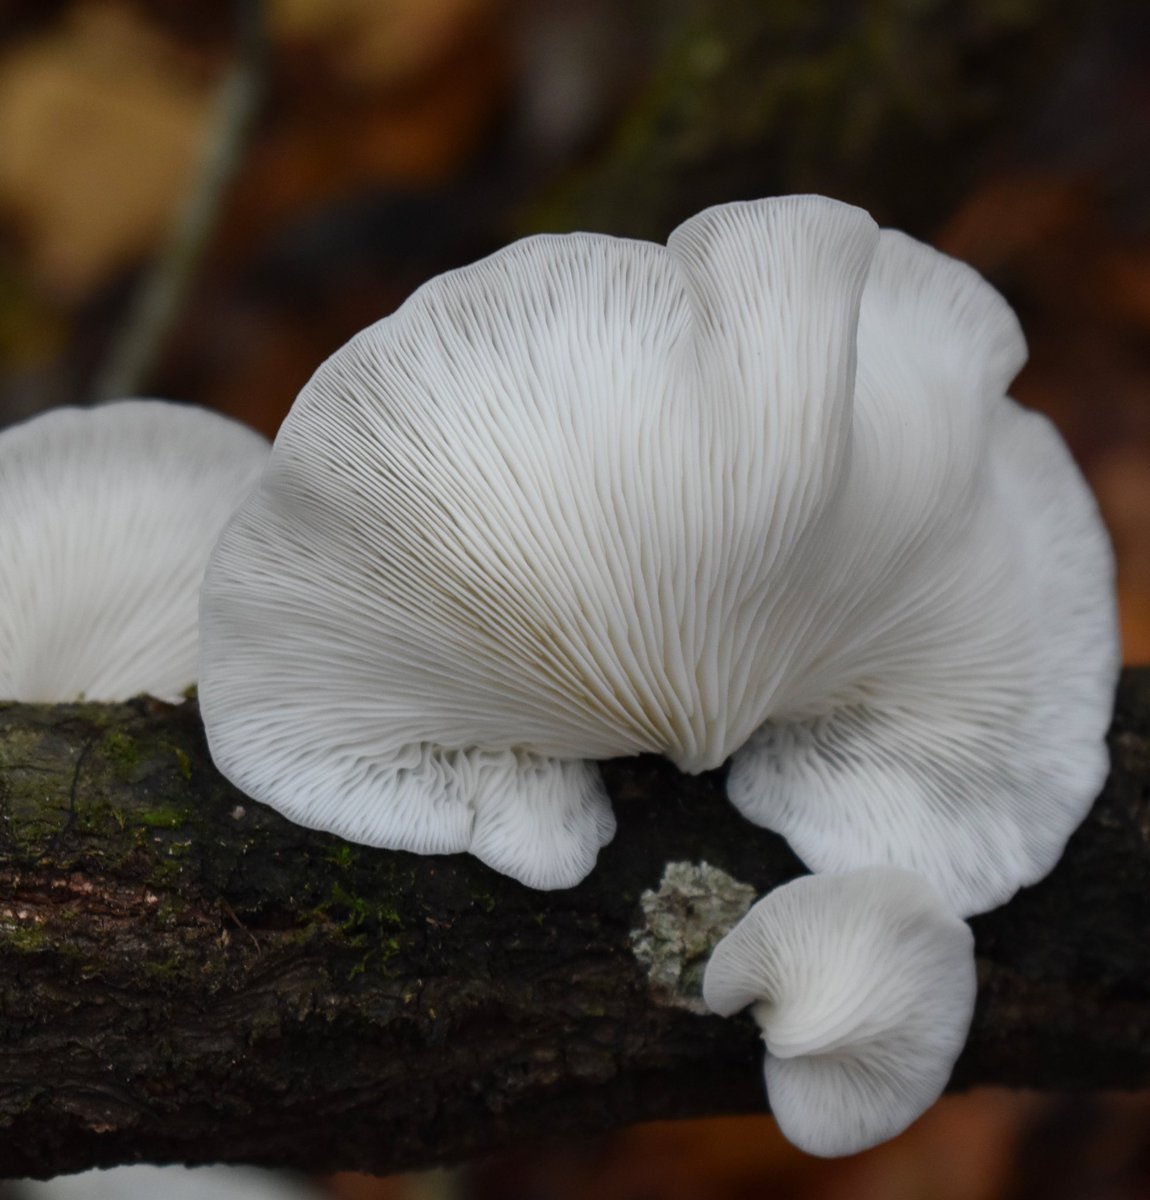 Lung oysters (Pleurotus pulmonarius) looking rather angelic with their perfectly white underside and delicate gills 👼🏼 happy fungi Friday!

#mushroomtwitter #nature #fungifriday #fantasticfungi #biodiversity #floridanature